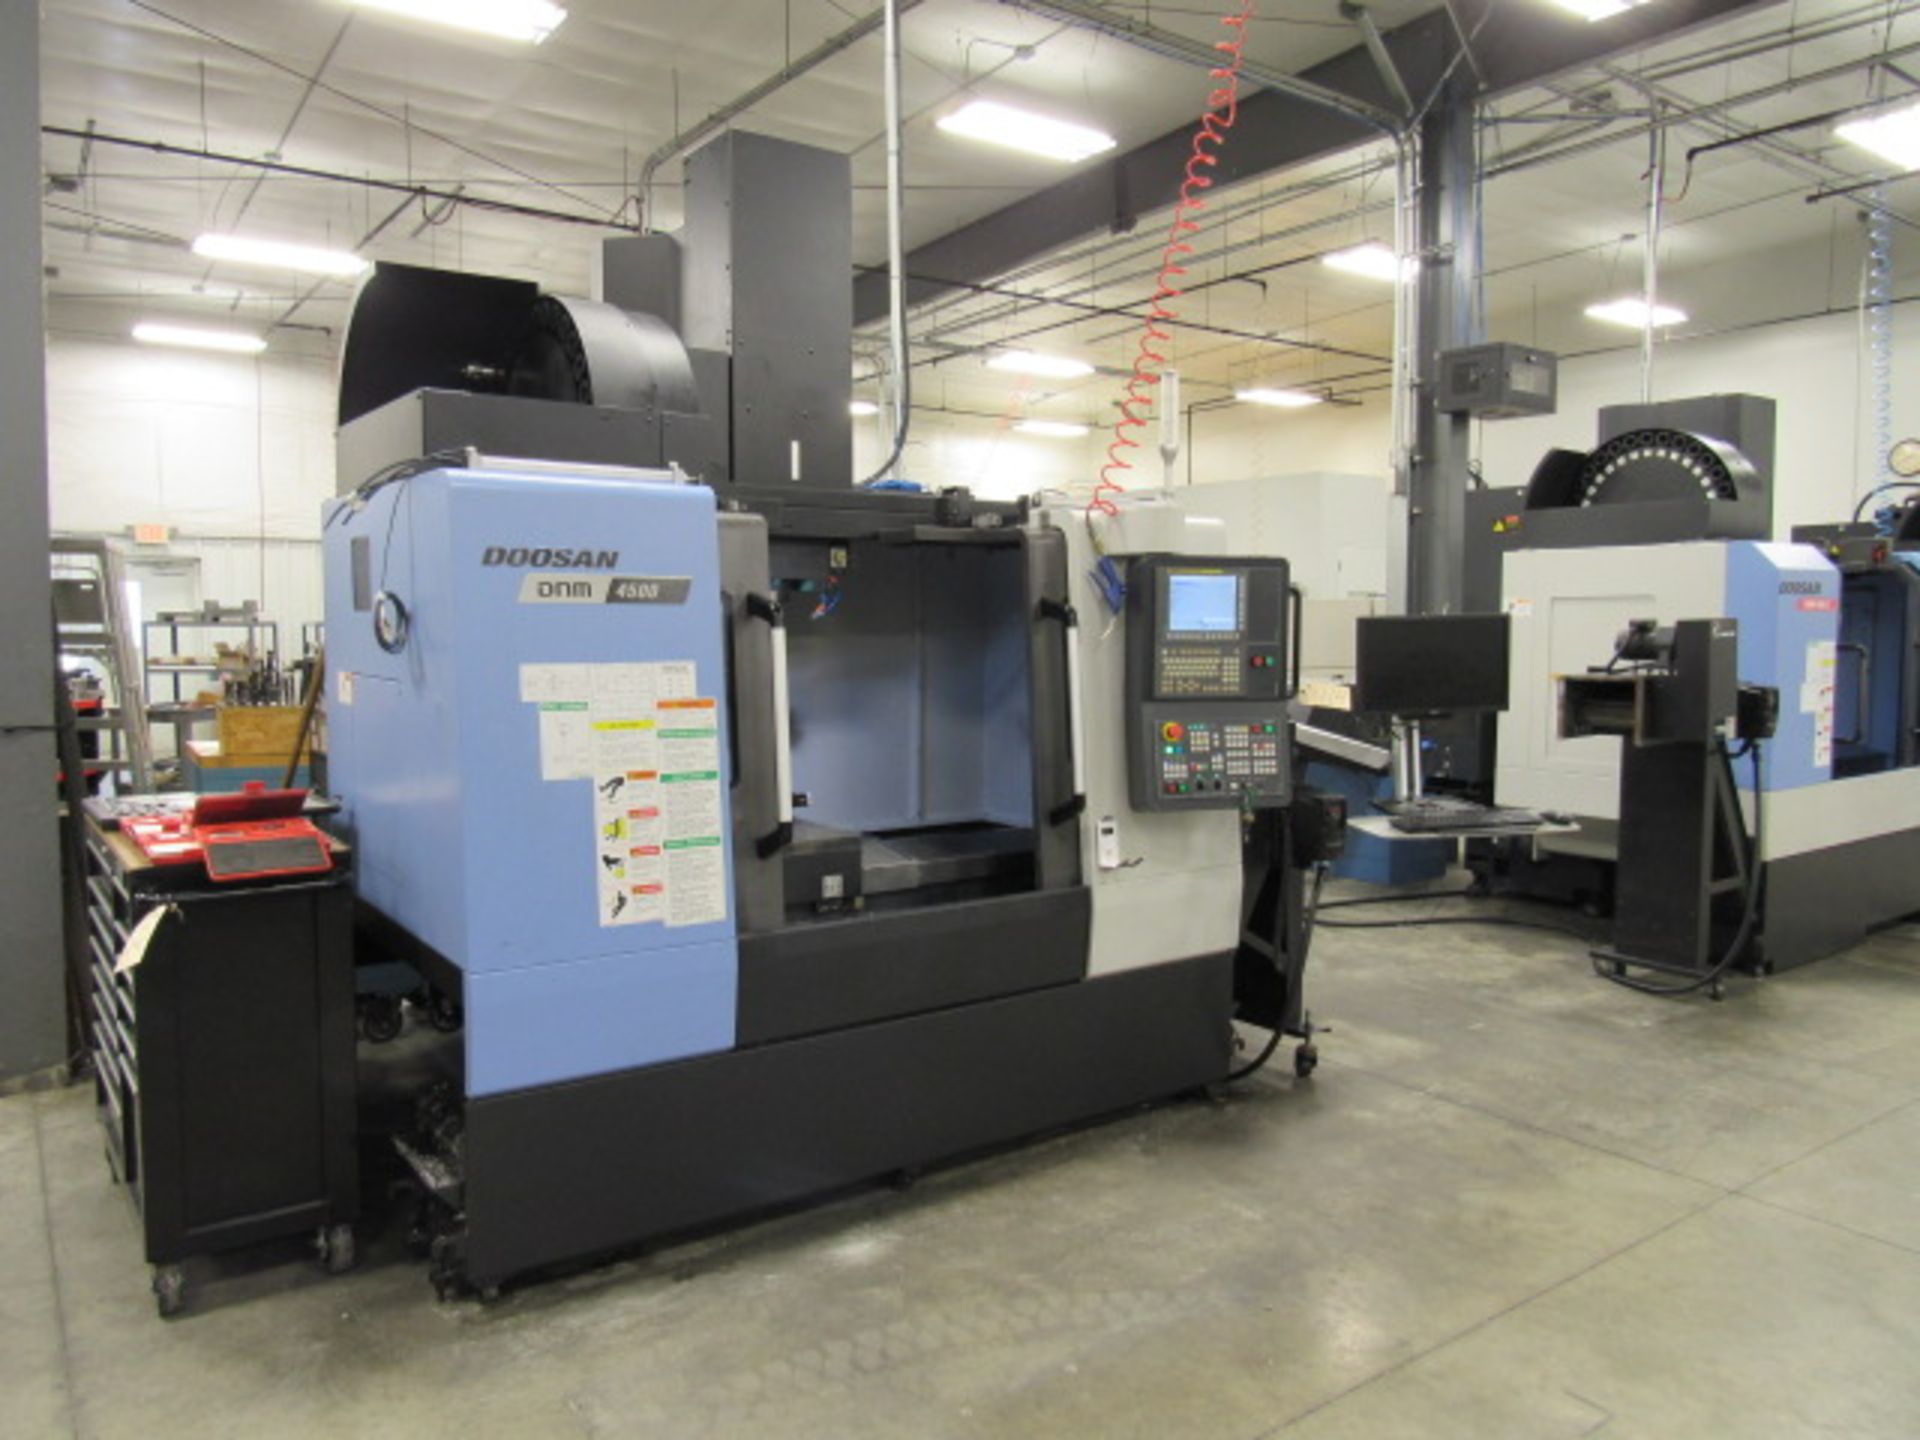 Doosan DNM 4500 CNC Vertical Machining Center with 39.4'' x 17.7'' Tables, Big Plus #40, Spindle - Image 5 of 8